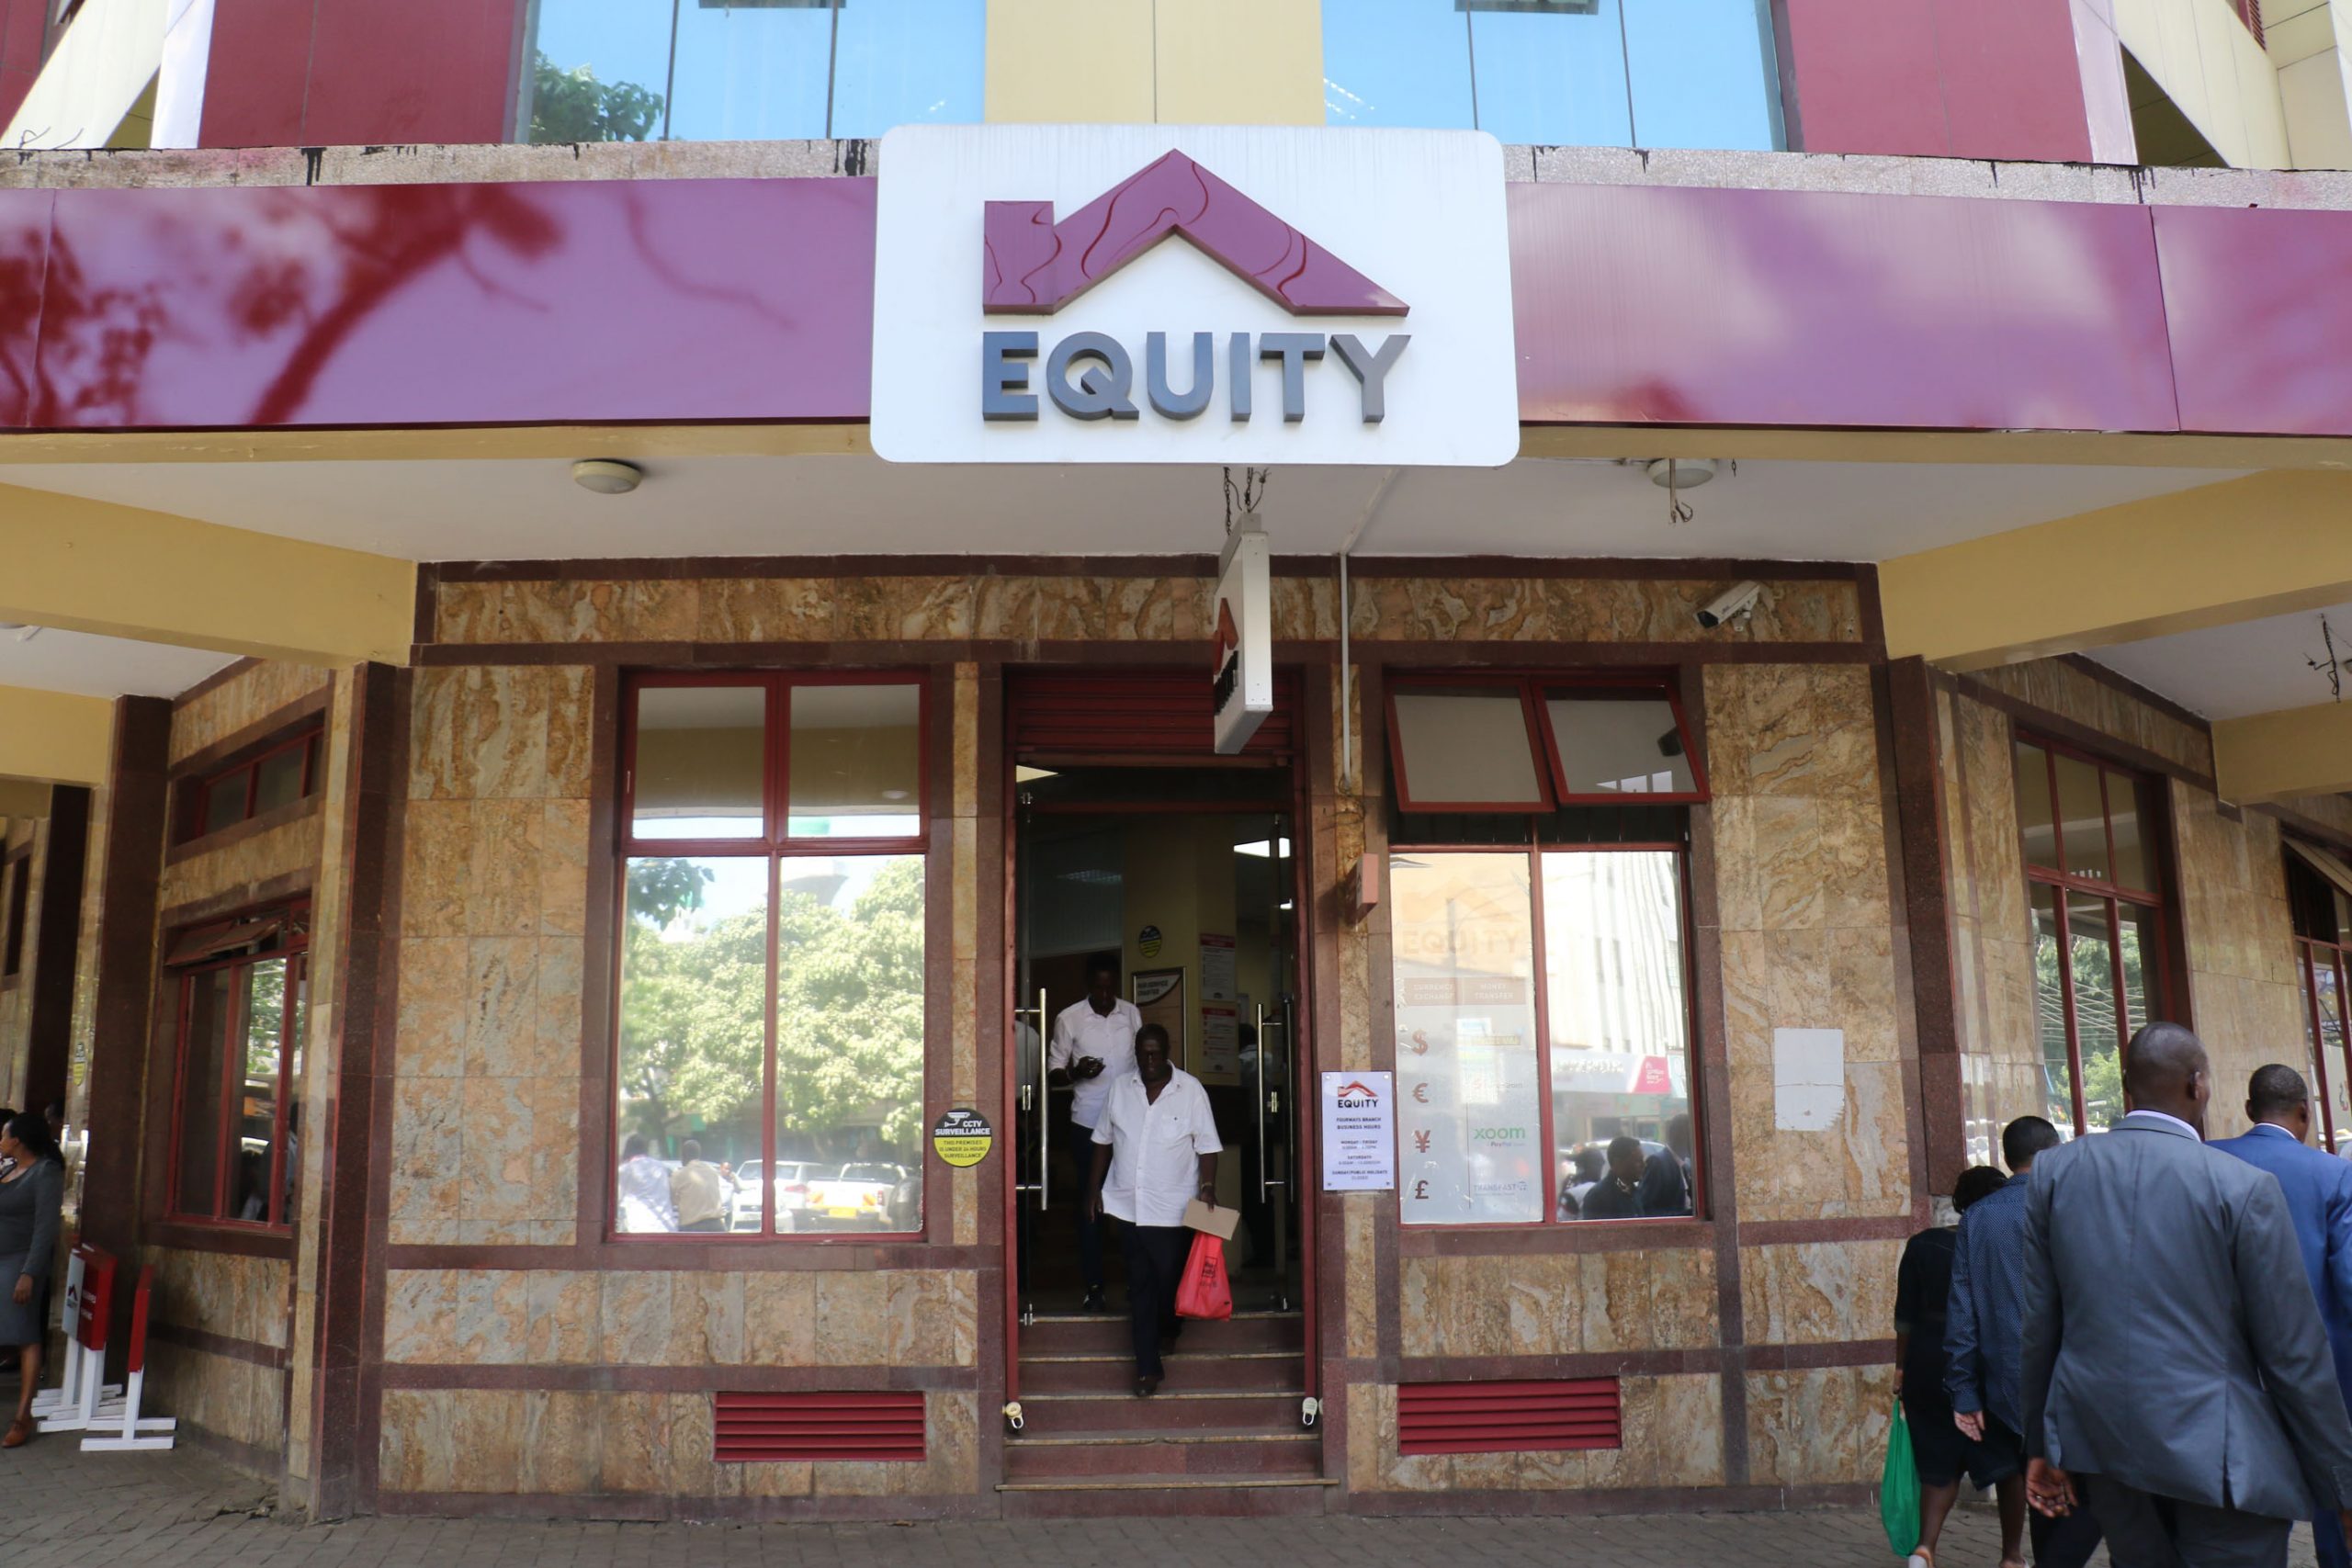 Hundreds of Kenyan Businesses Set to Benefit From KES 18.6 Billion Loan to Equity Bank By IFC